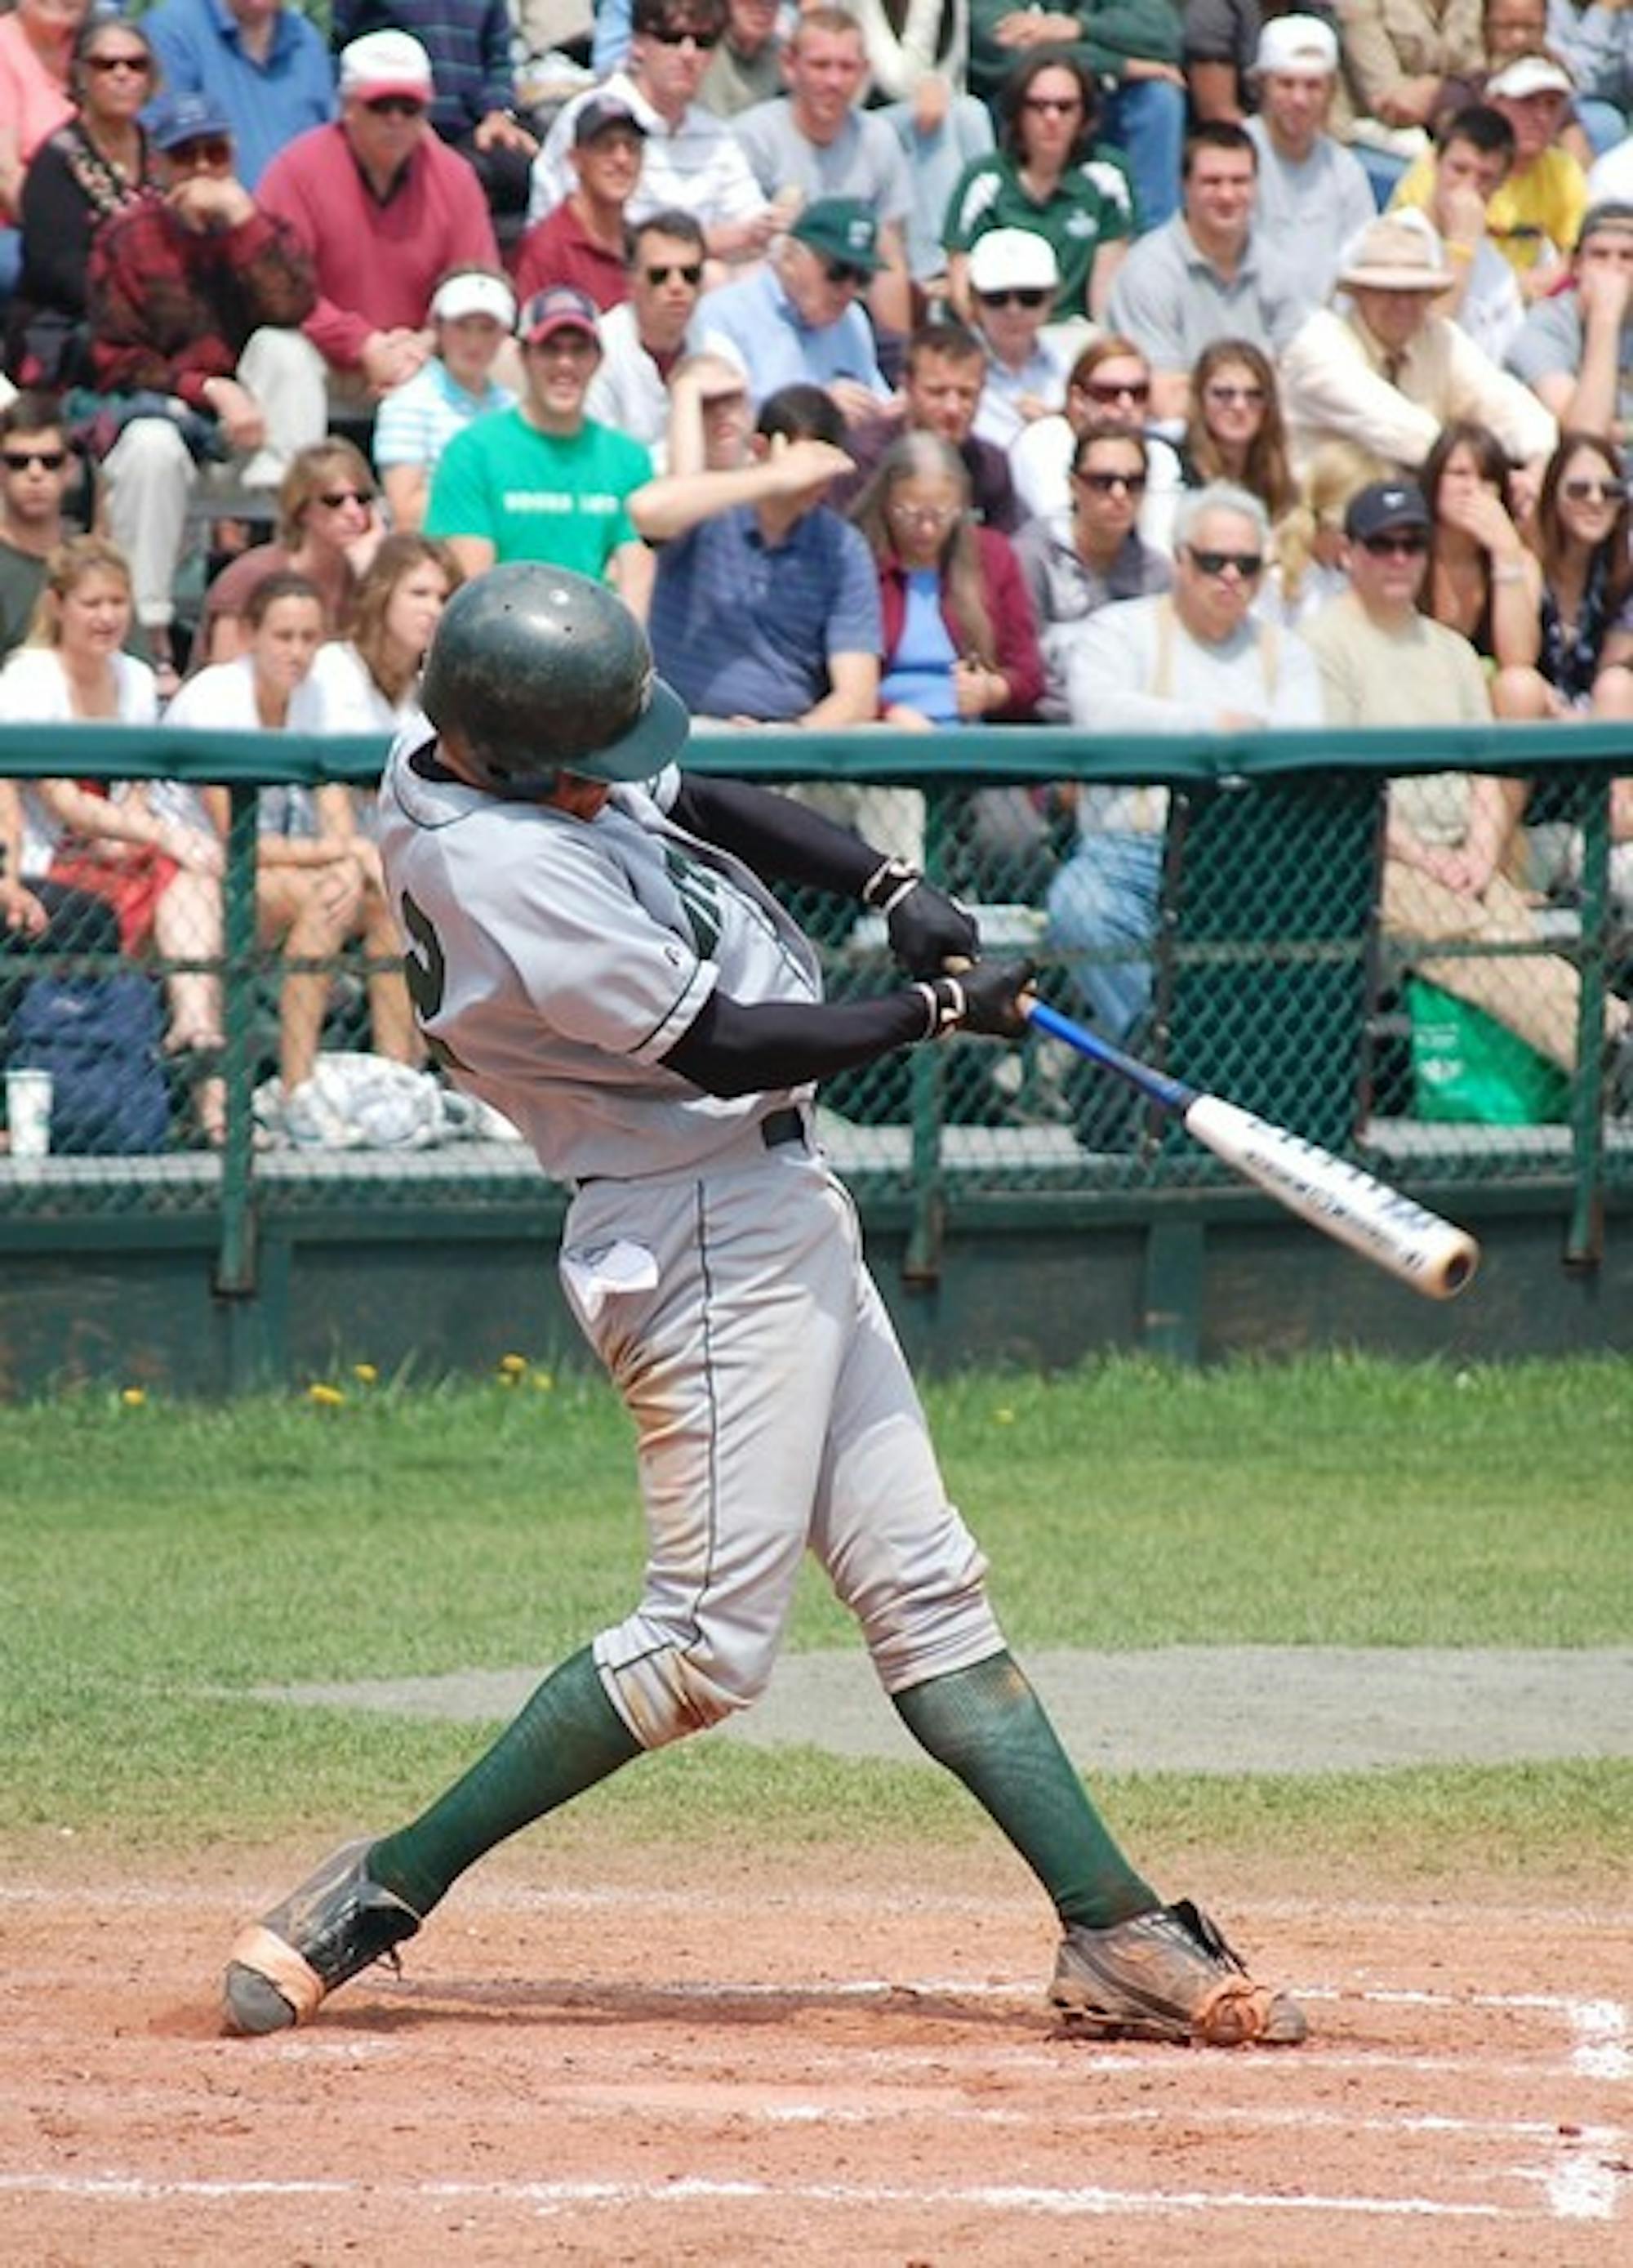 Dartmouth baseball had the best opportunity of any Big Green team to move on to the NCAA tournament, but fell short with last week's losses to Columbia.